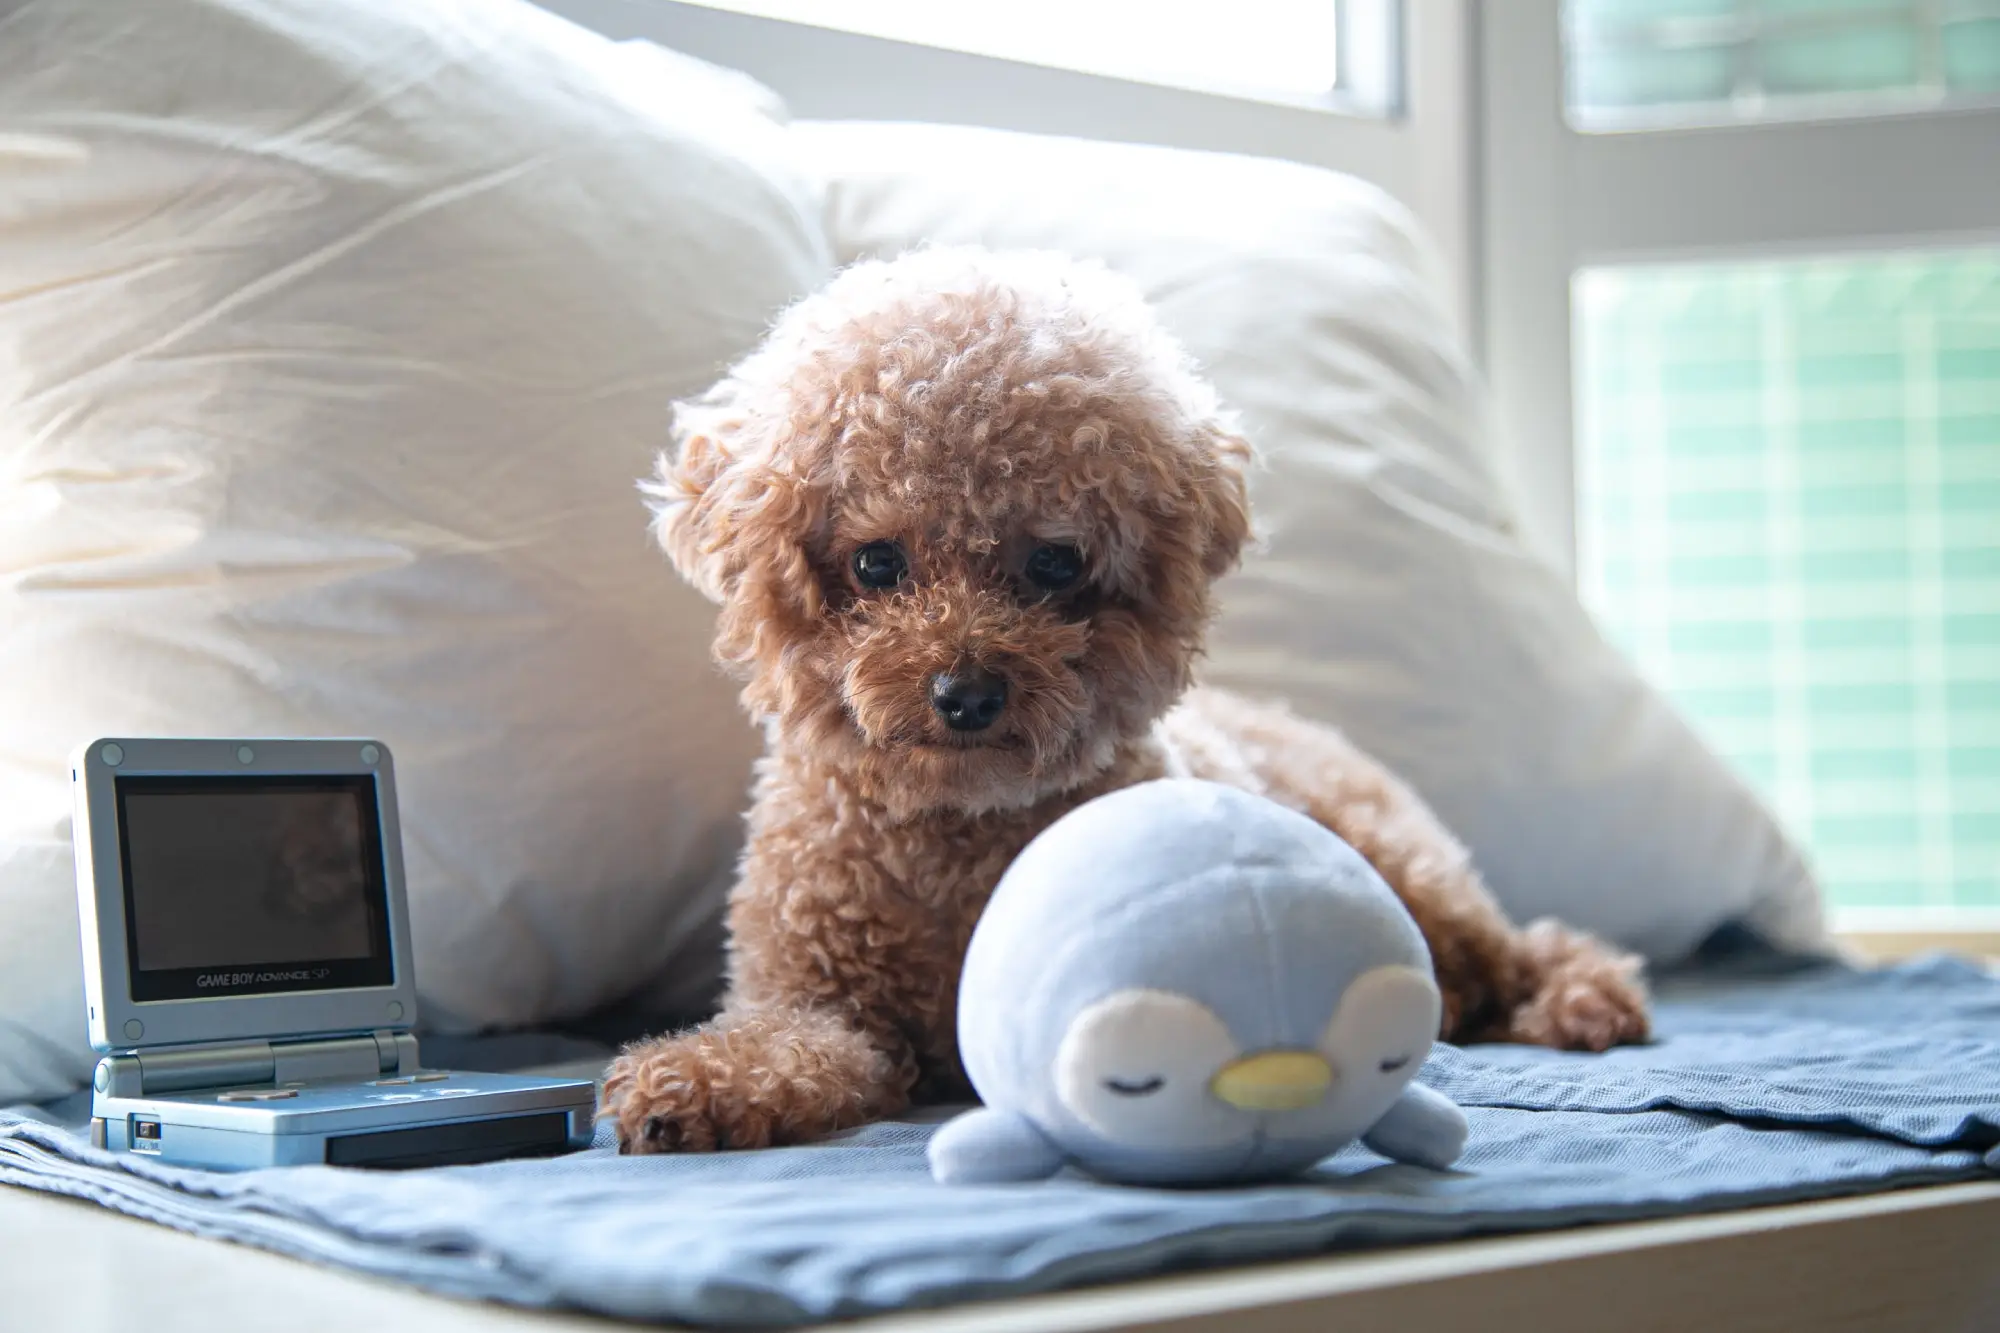 A brown poodle laying on a pillow next to a toy.